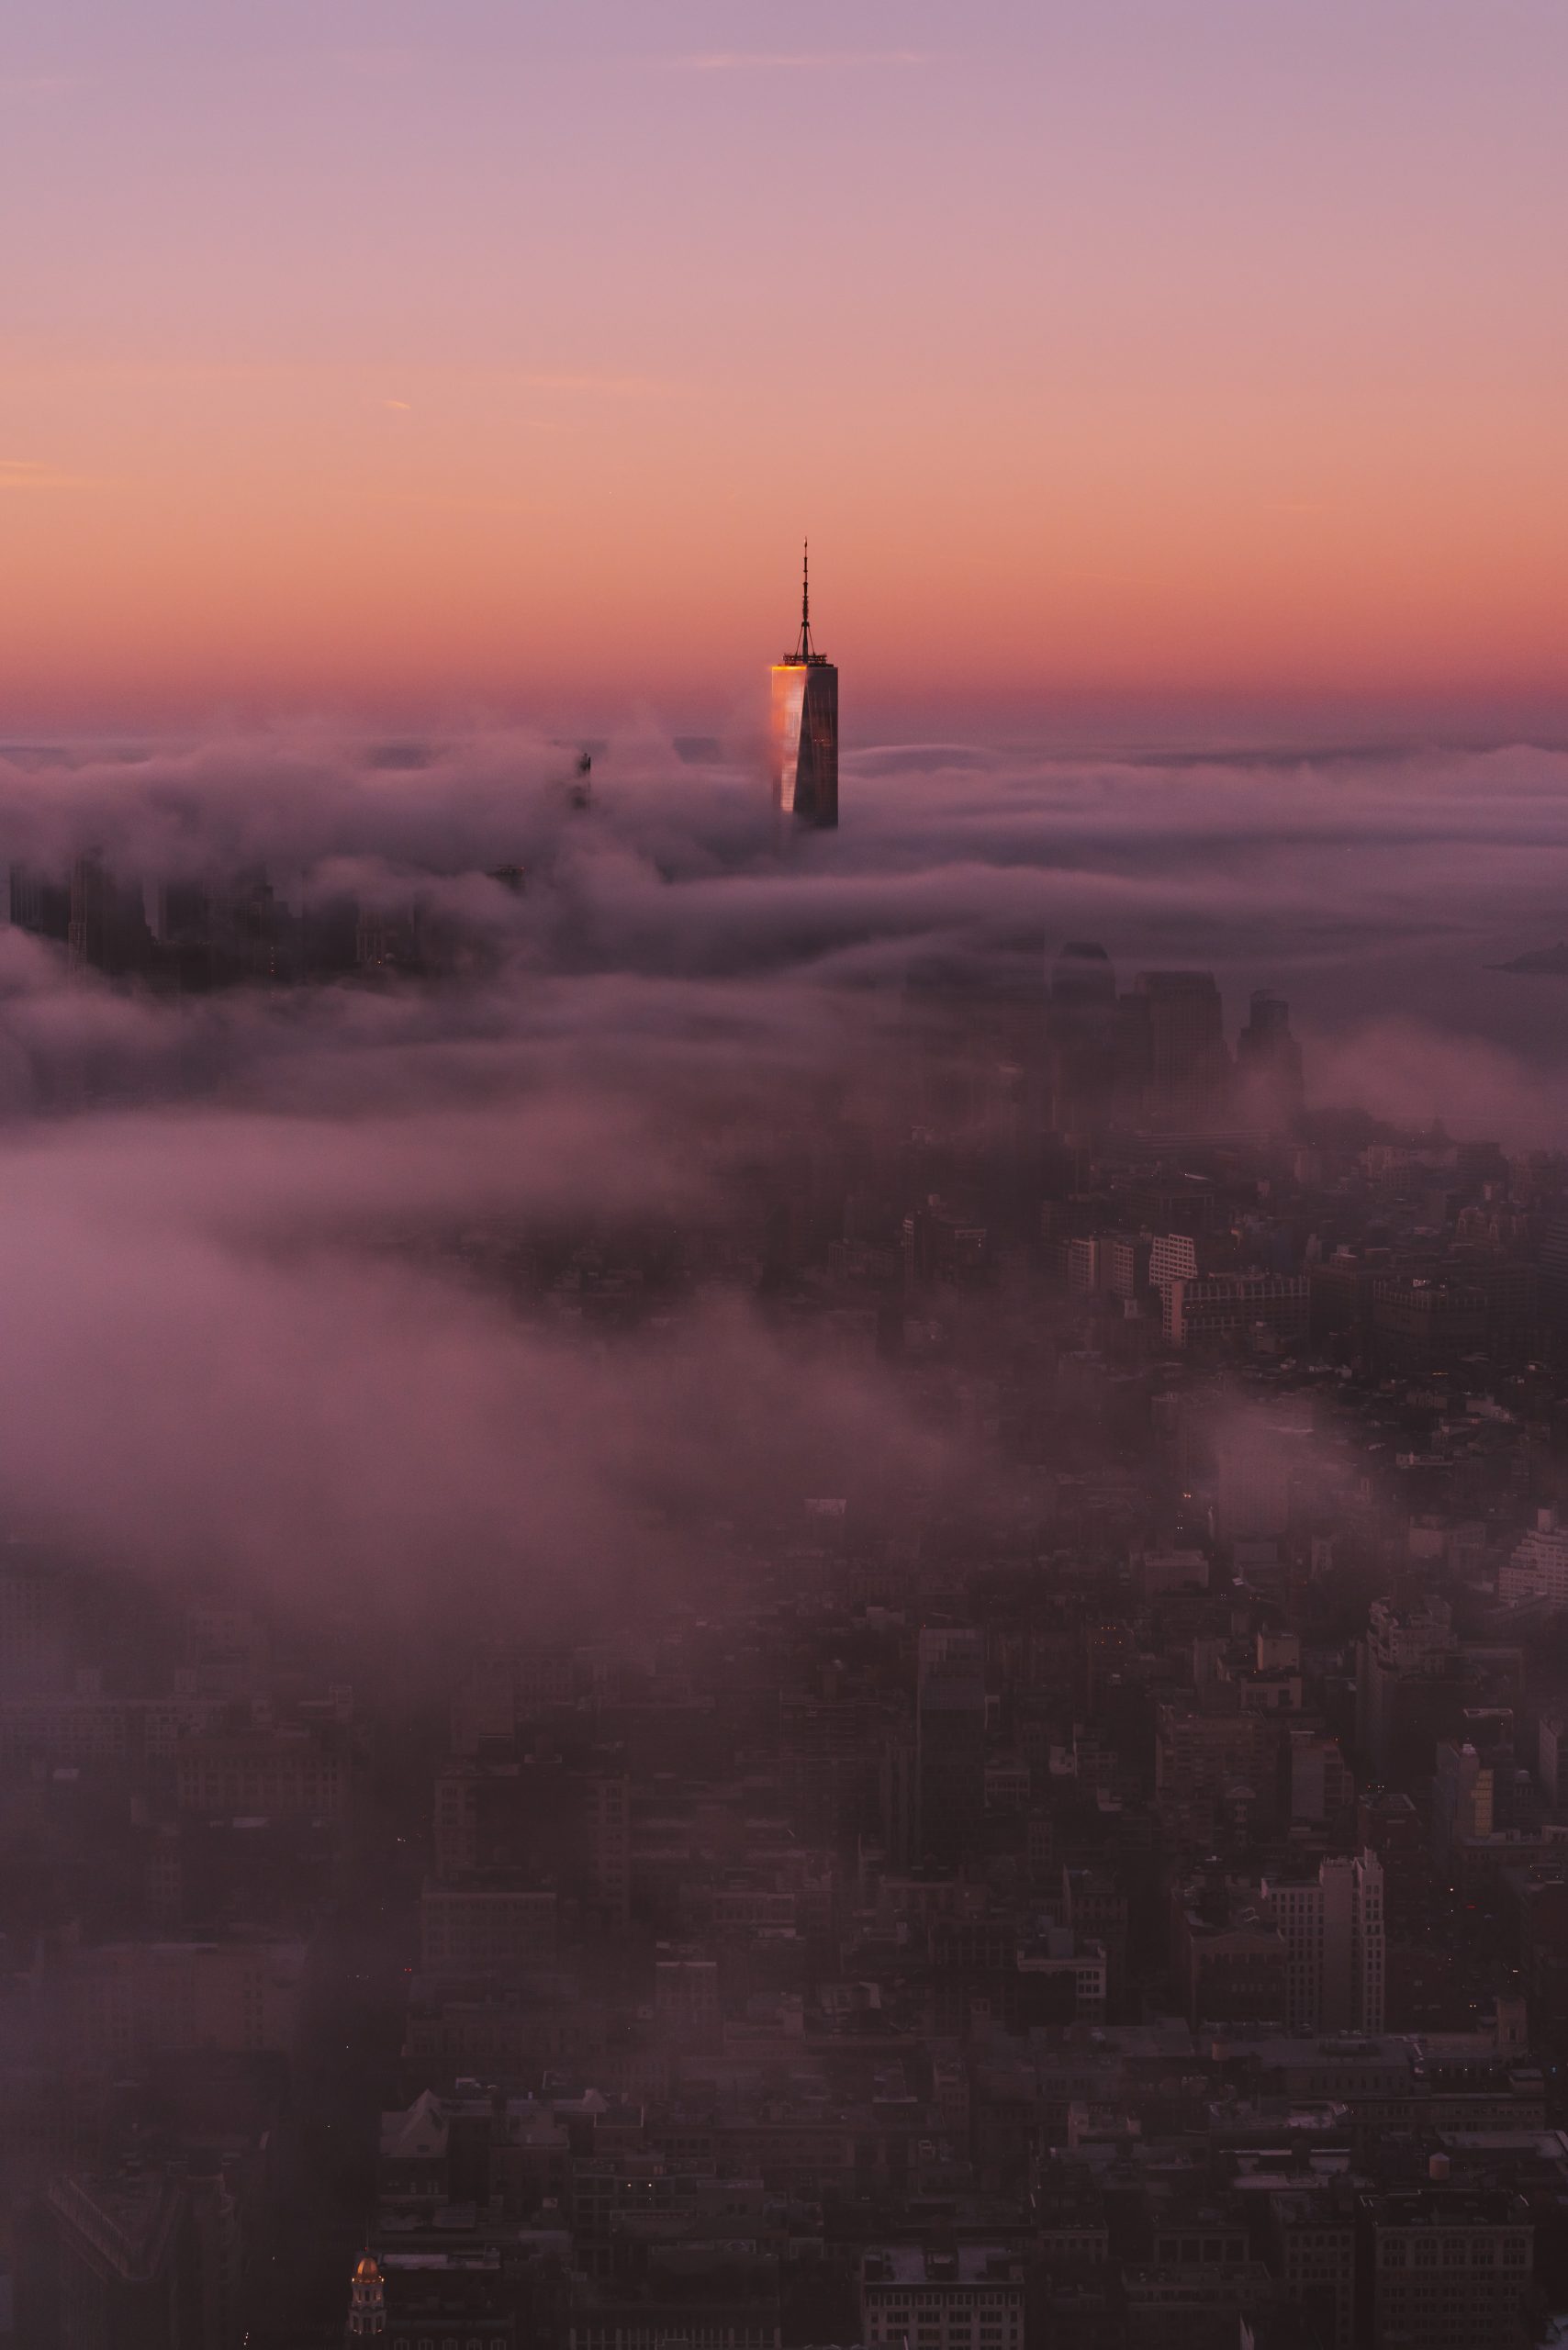 Photograph of New York City at sunrise by Laura Sills